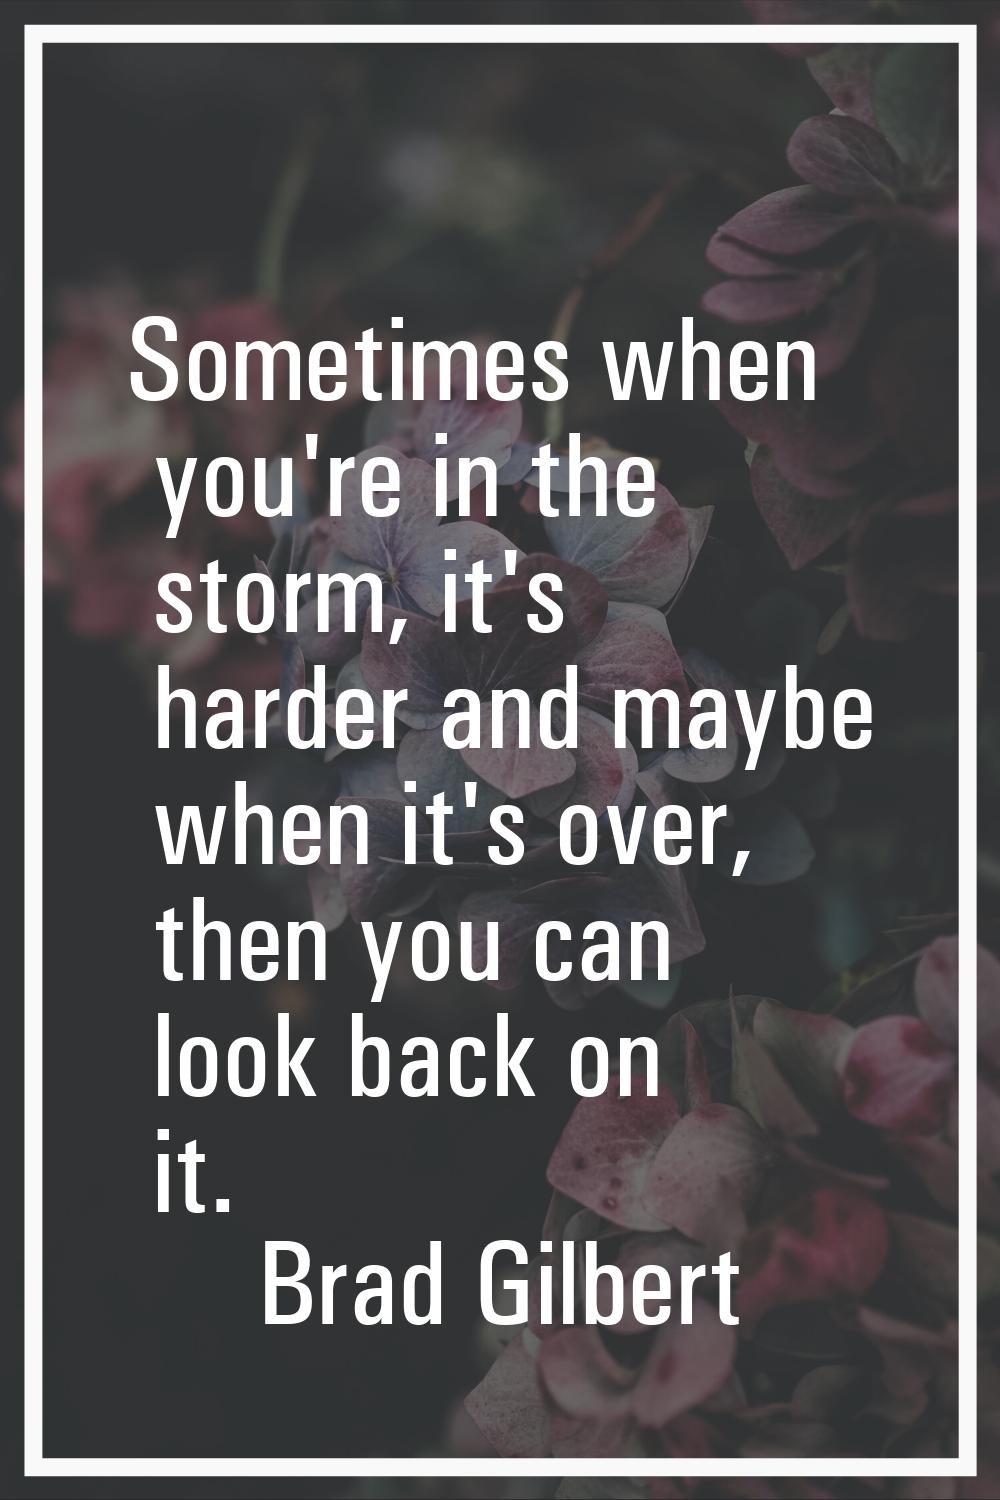 Sometimes when you're in the storm, it's harder and maybe when it's over, then you can look back on